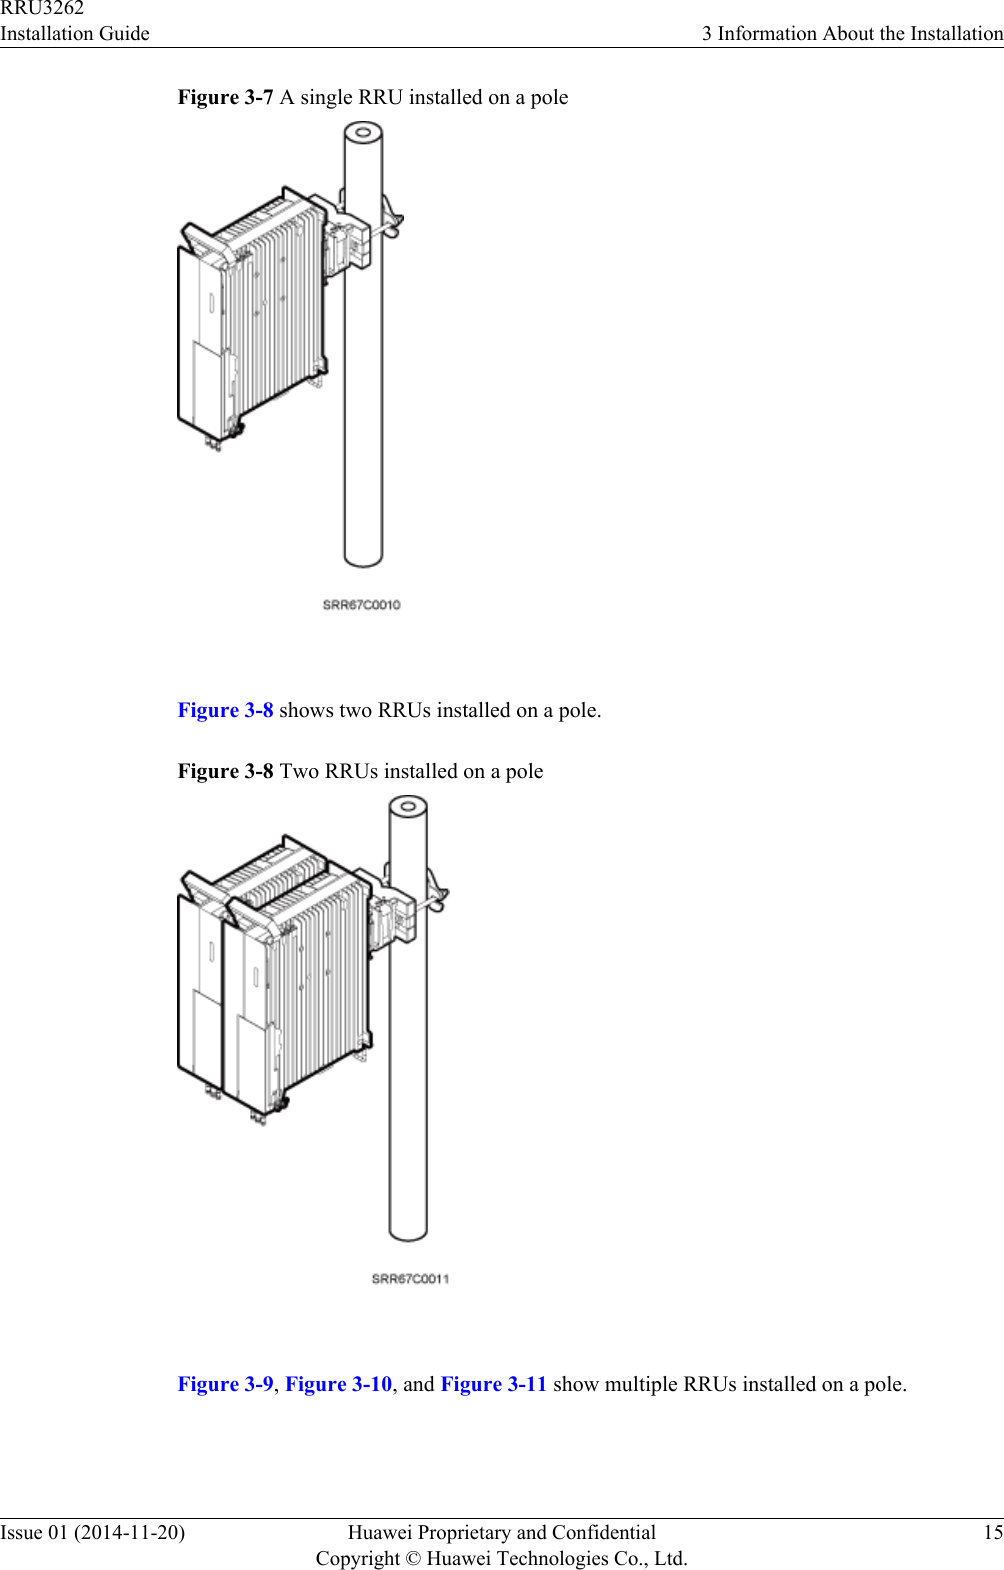 Figure 3-7 A single RRU installed on a pole Figure 3-8 shows two RRUs installed on a pole.Figure 3-8 Two RRUs installed on a pole Figure 3-9, Figure 3-10, and Figure 3-11 show multiple RRUs installed on a pole.RRU3262Installation Guide 3 Information About the InstallationIssue 01 (2014-11-20) Huawei Proprietary and ConfidentialCopyright © Huawei Technologies Co., Ltd.15